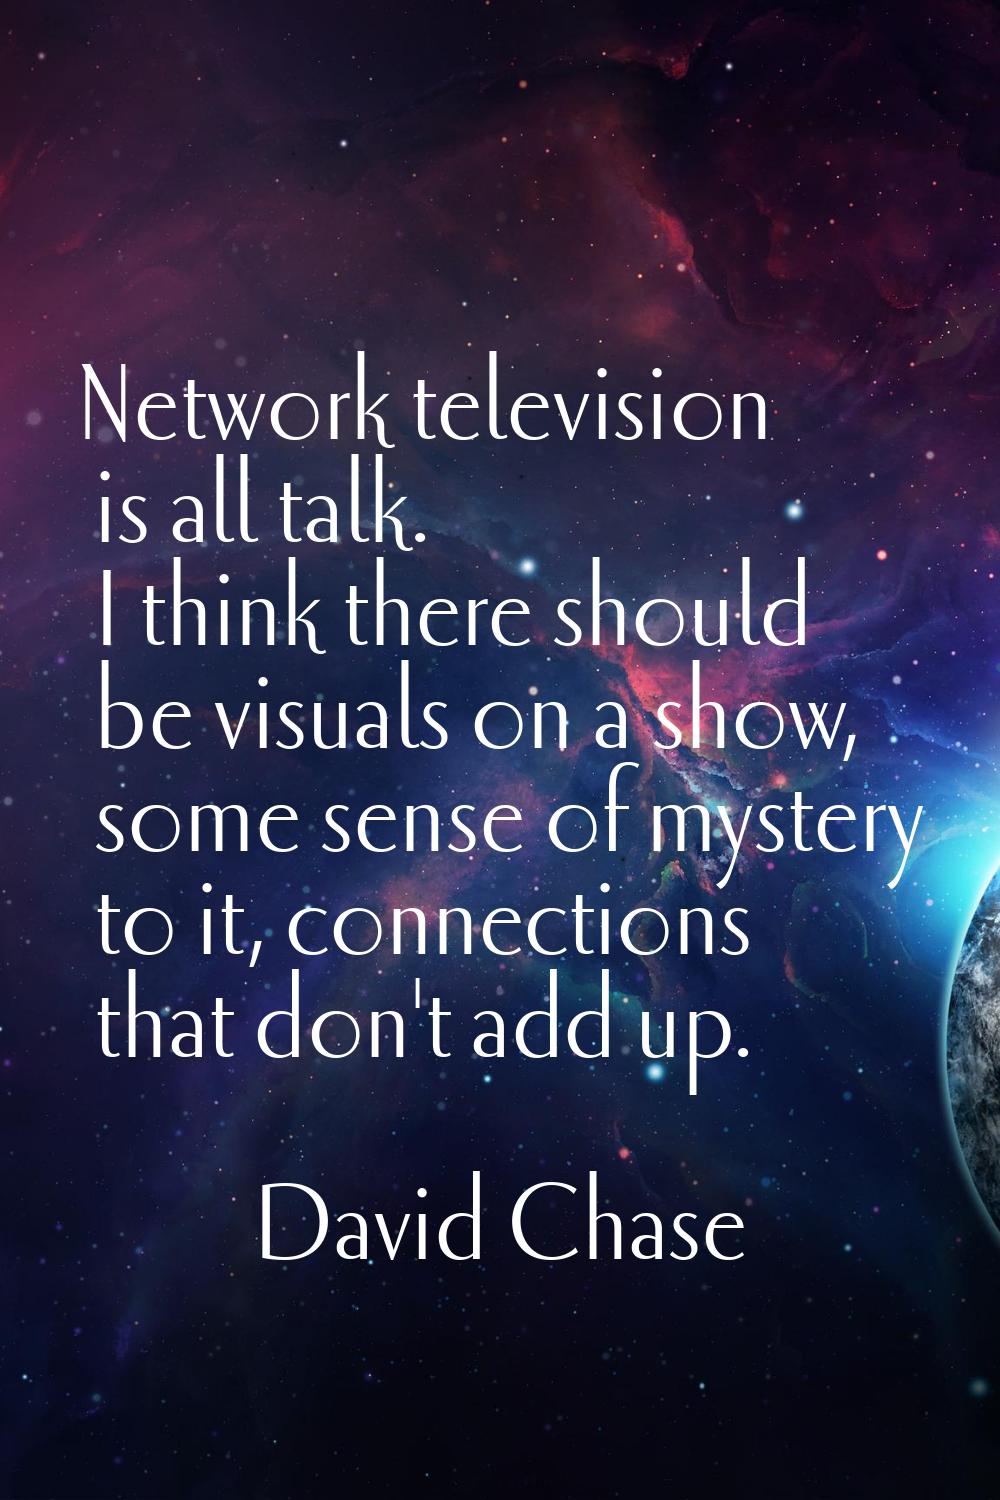 Network television is all talk. I think there should be visuals on a show, some sense of mystery to